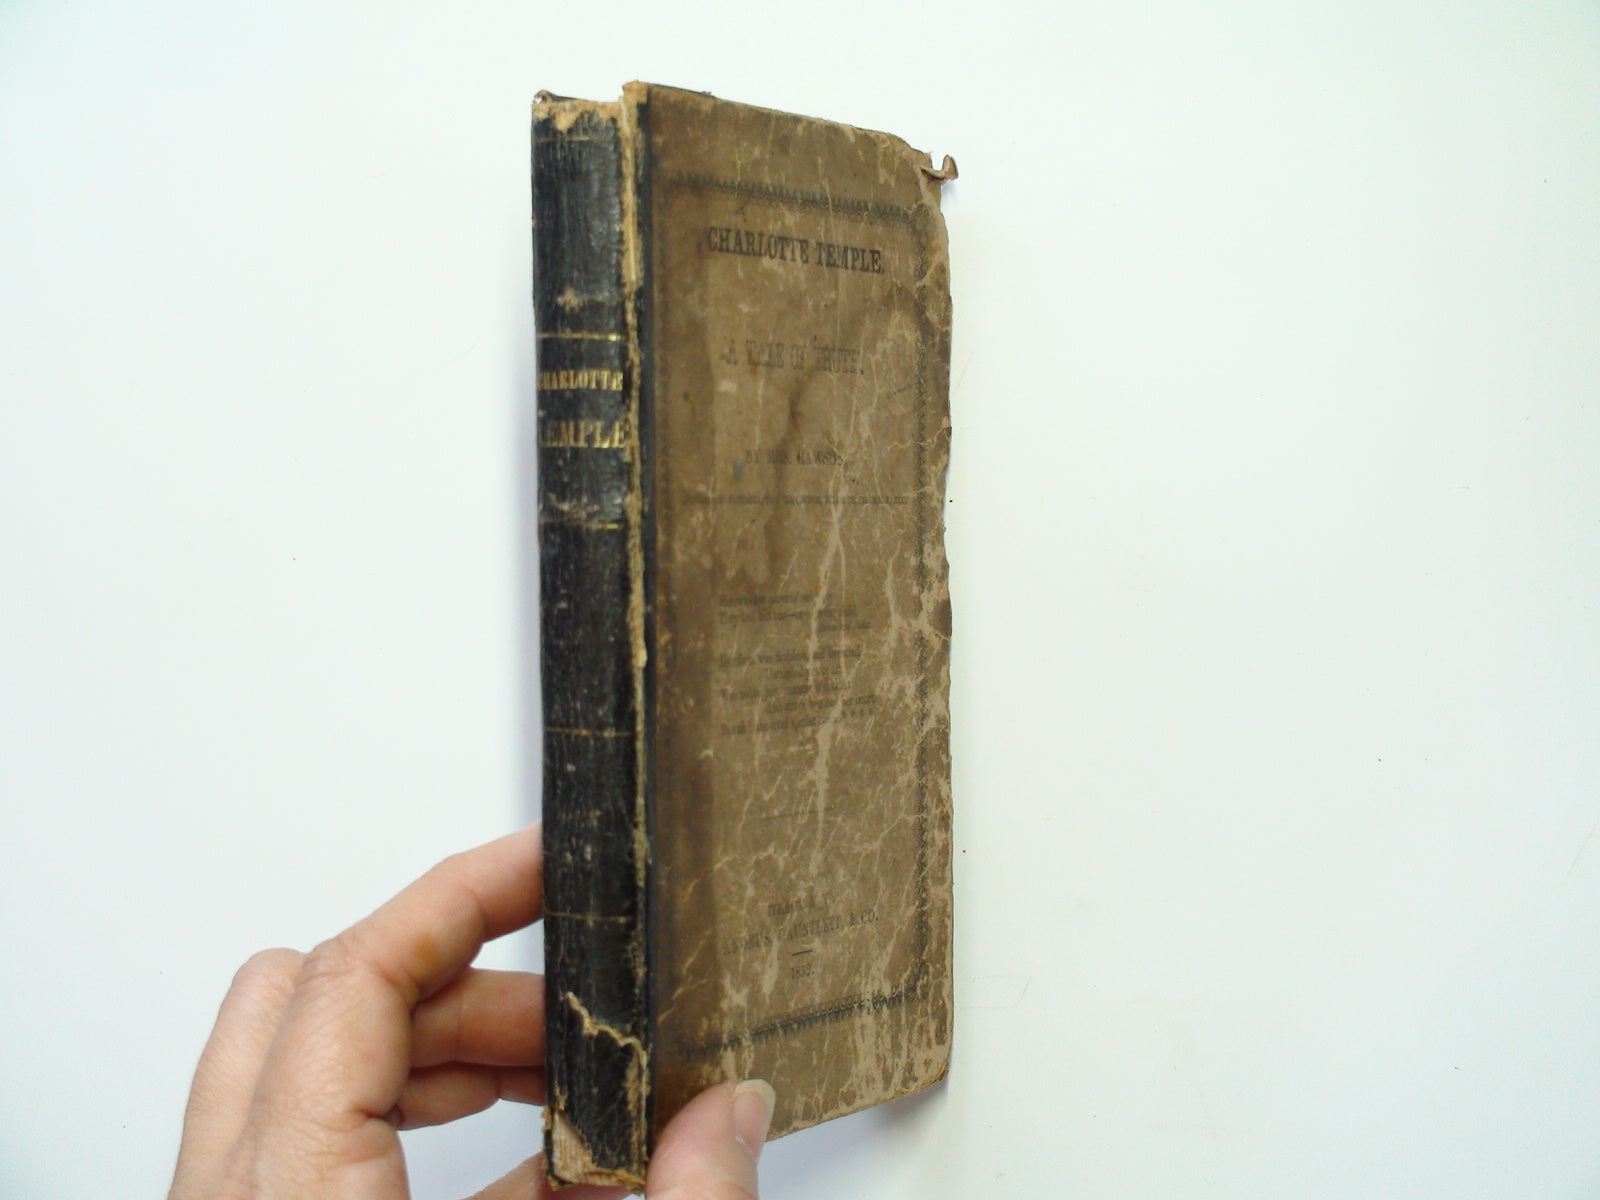 A Tale of Truth, Charlotte Temple, by Susanna Rowson, Andrus Gauntlett, Rare, 1852